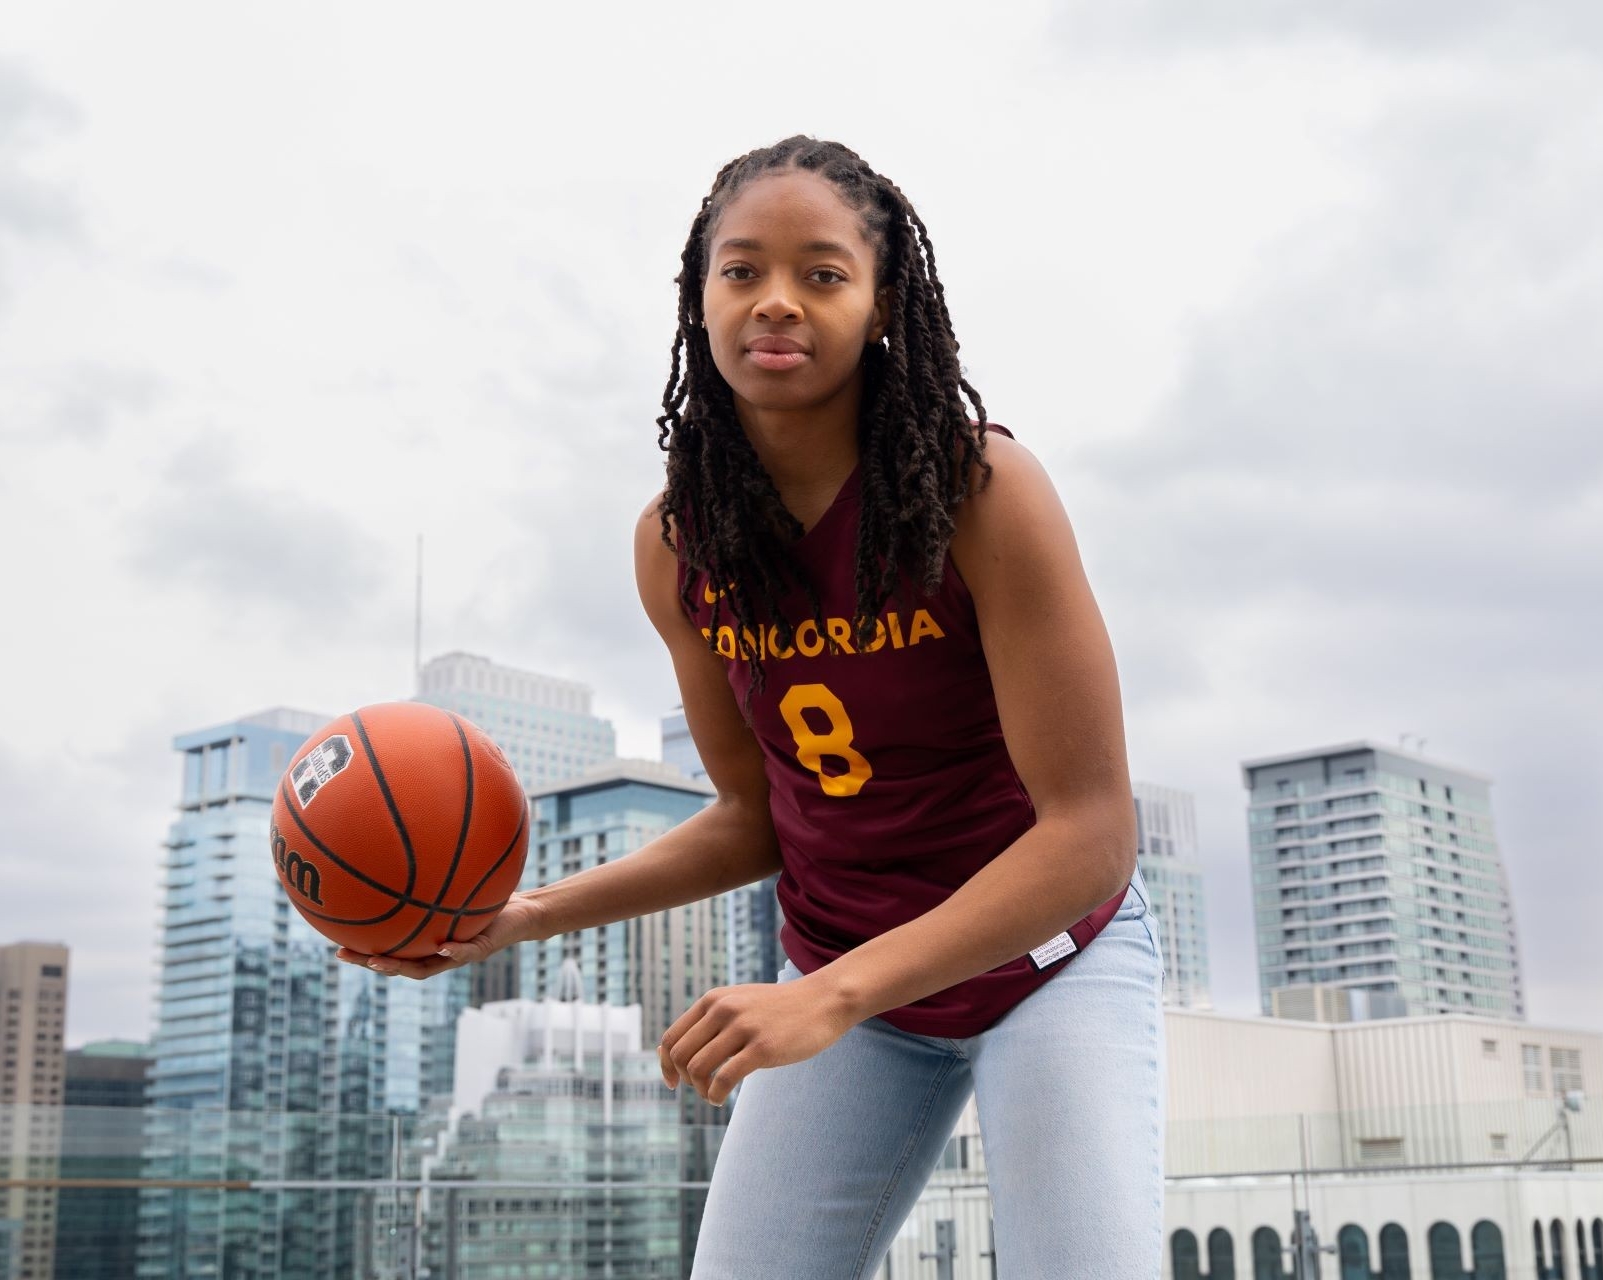 A female basketball player in Concordia uniform posing with a basketball, with Montreal's skyline in the background.